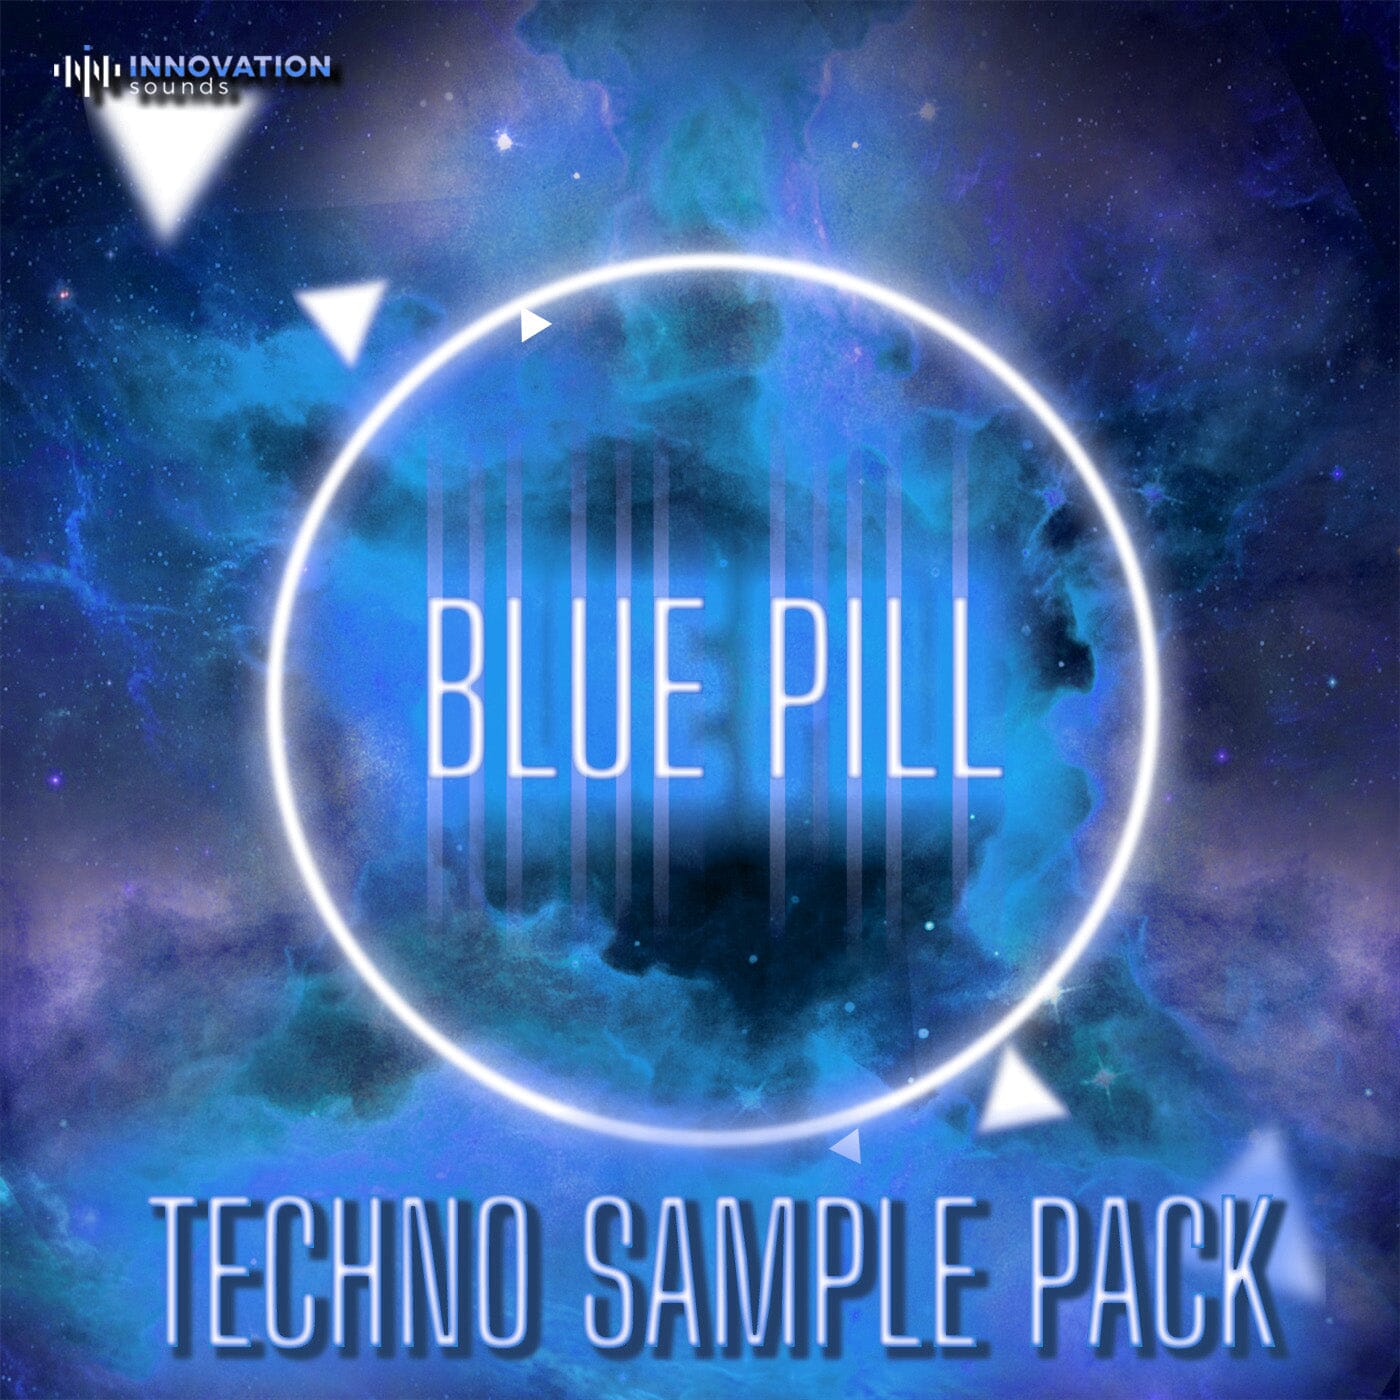 Blue Pill - Techno Sample Pack - (WAV and MIDI Files) Sample Pack Innovation Sounds